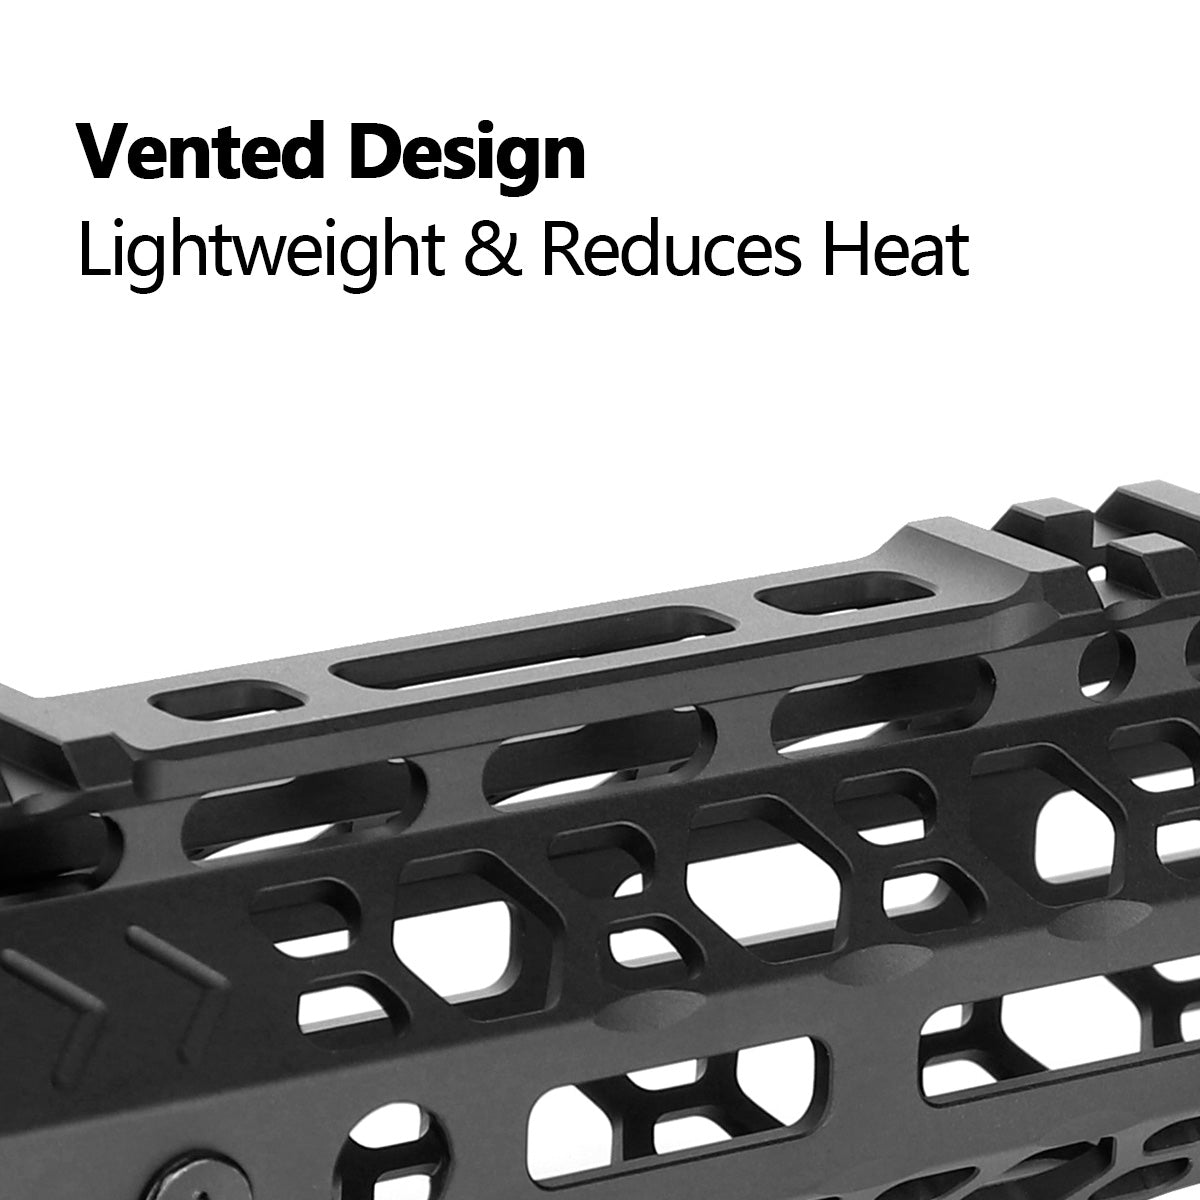 Ultra Light Free Float M-LOK Handguard,Ultra Slim and Enlarged Vented Design for Comfort and Weight Reduction, cool both your handguard and barrel.